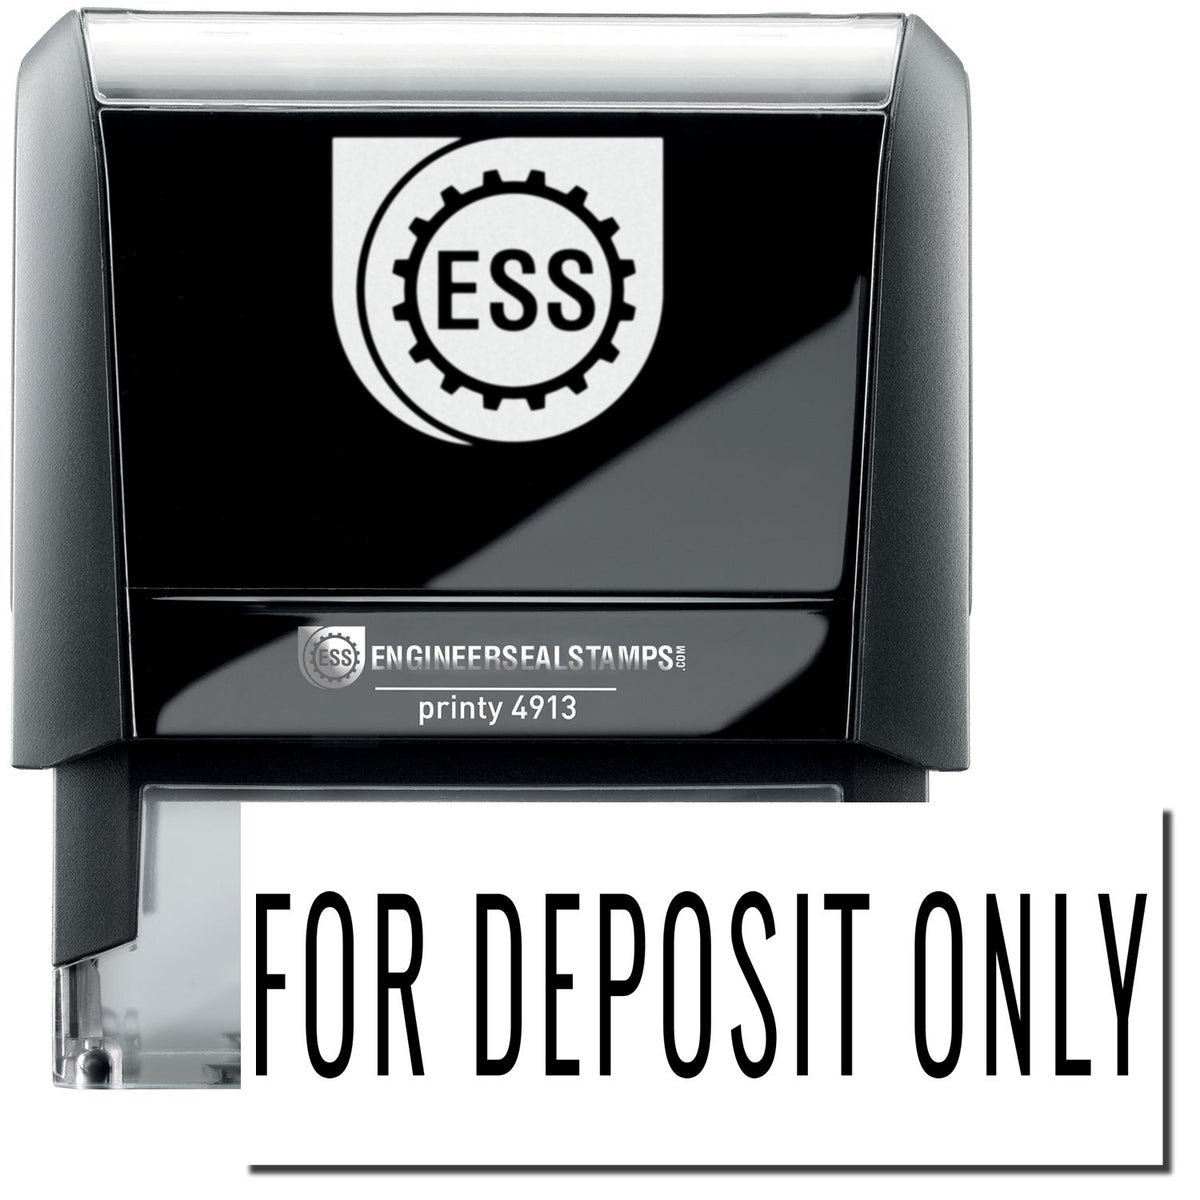 A self-inking stamp with a stamped image showing how the text &quot;FOR DEPOSIT ONLY&quot; in a large narrow font is displayed by it after stamping.